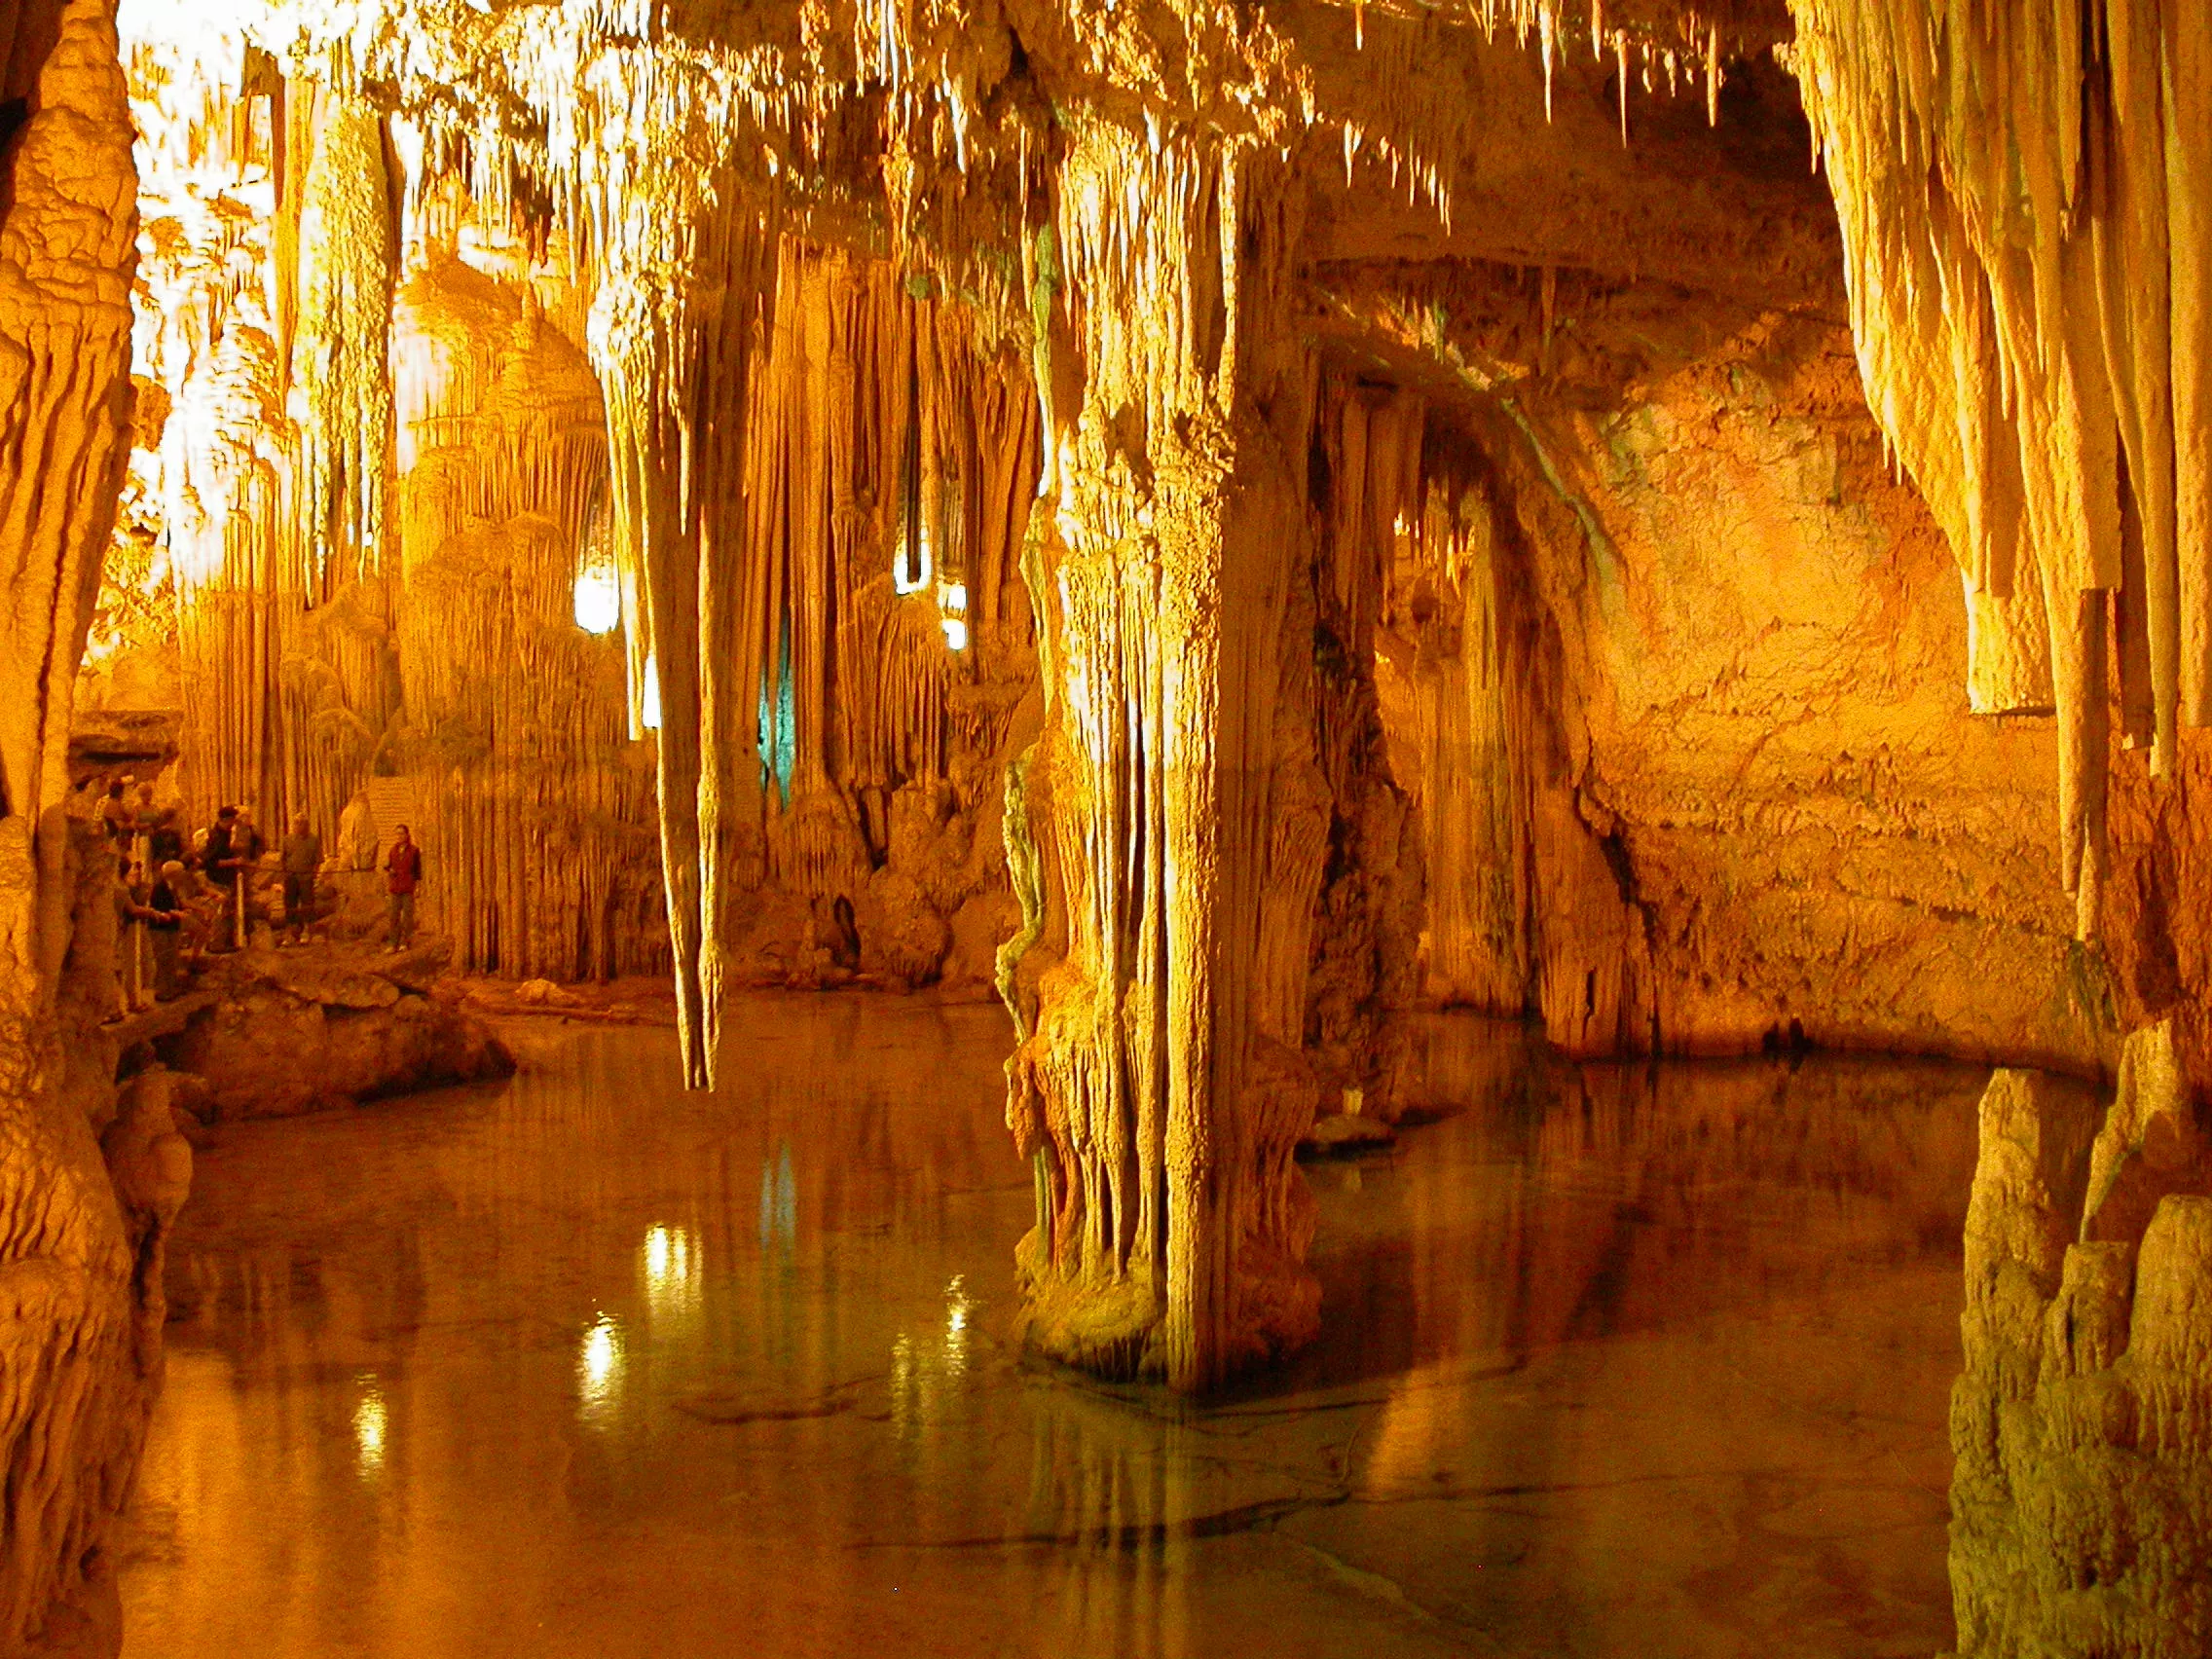 Neptune's Grotto in Italy, Europe | Caves & Underground Places - Rated 4.1